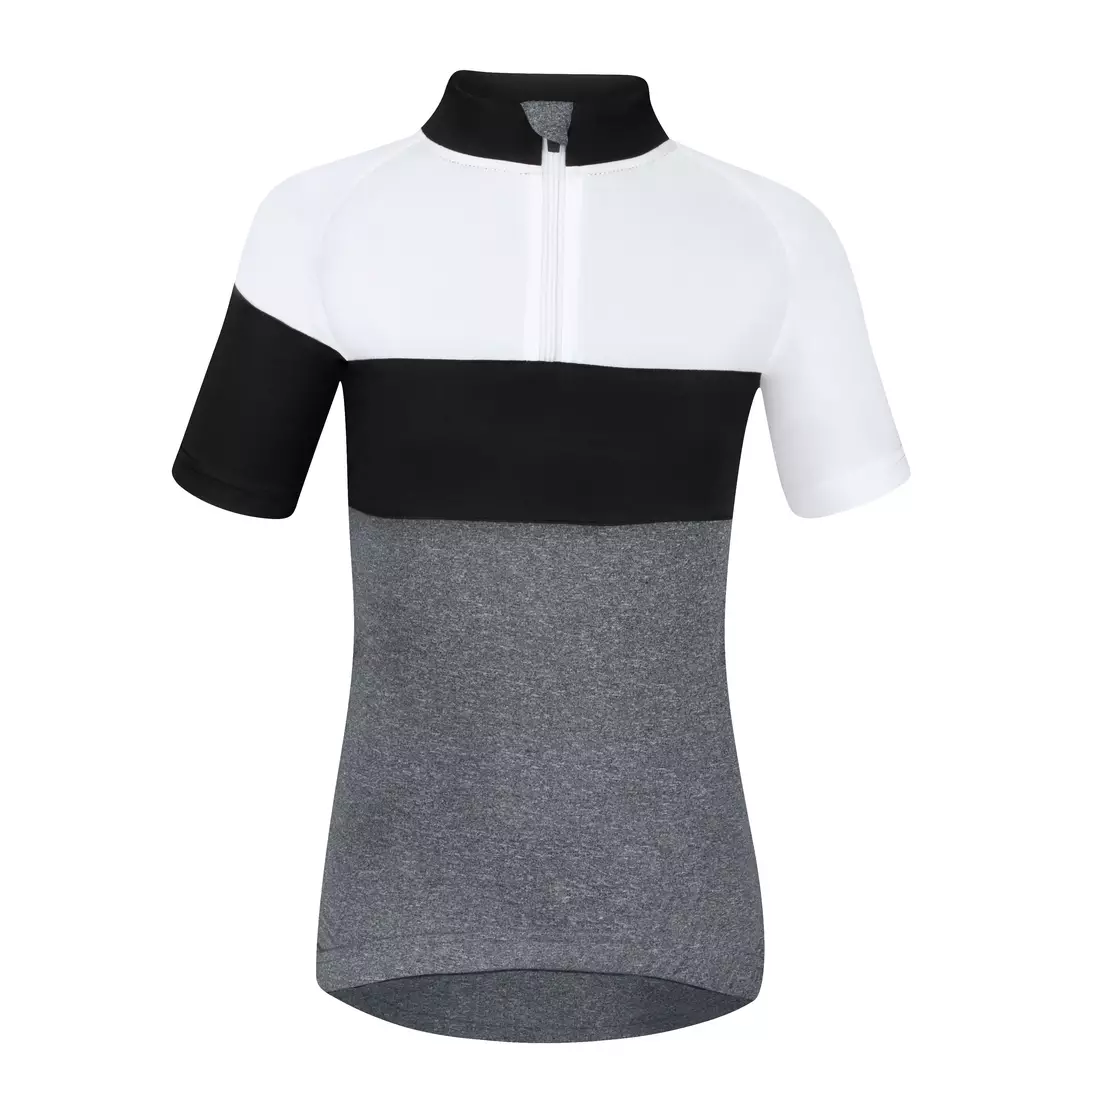 FORCE Children's cycling jersey KID VIEW, gray-white-black 9001046-KID3